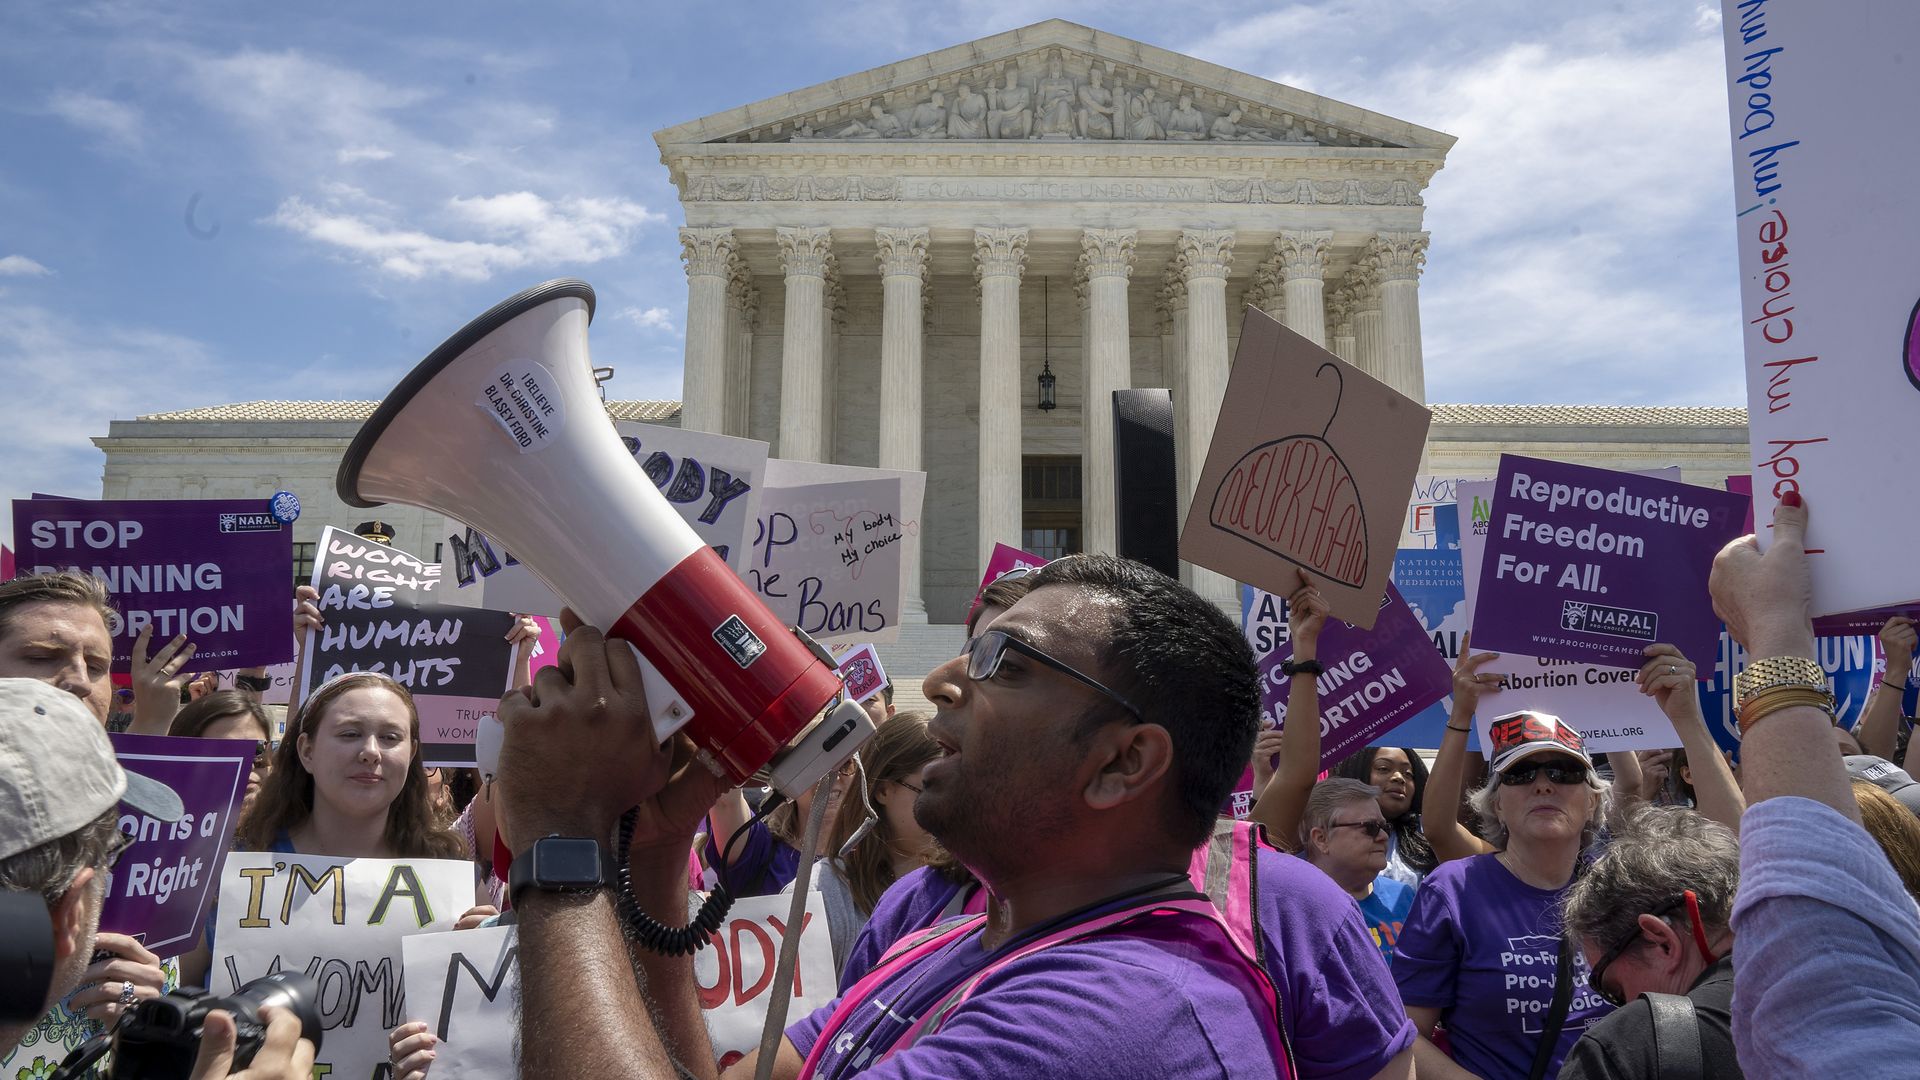 A man holds a megaphone as he leads pro-choice protester chants in front of the supreme court building.